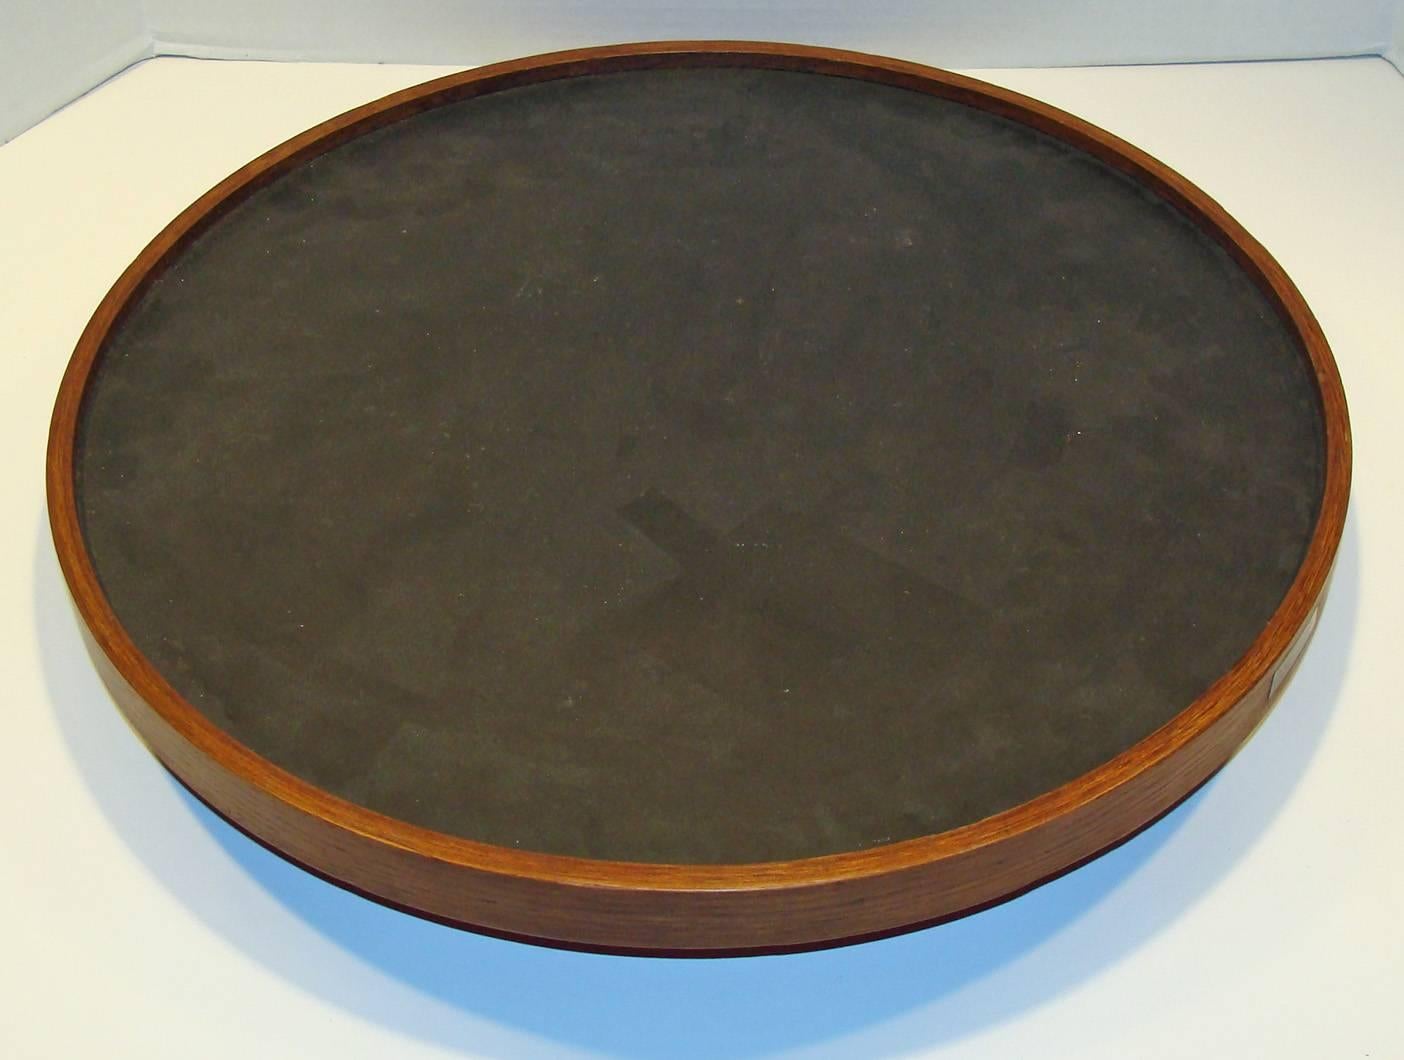 Rare vintage Hans Bolling tray designed for Torben Orskov, Copenhagen. Suitable as a stand-alone serving tray or fitted to Hans Bolling rolling cart.
Retains original label.

Tray is reversible (red and black lacquer) in an oak frame.

Note